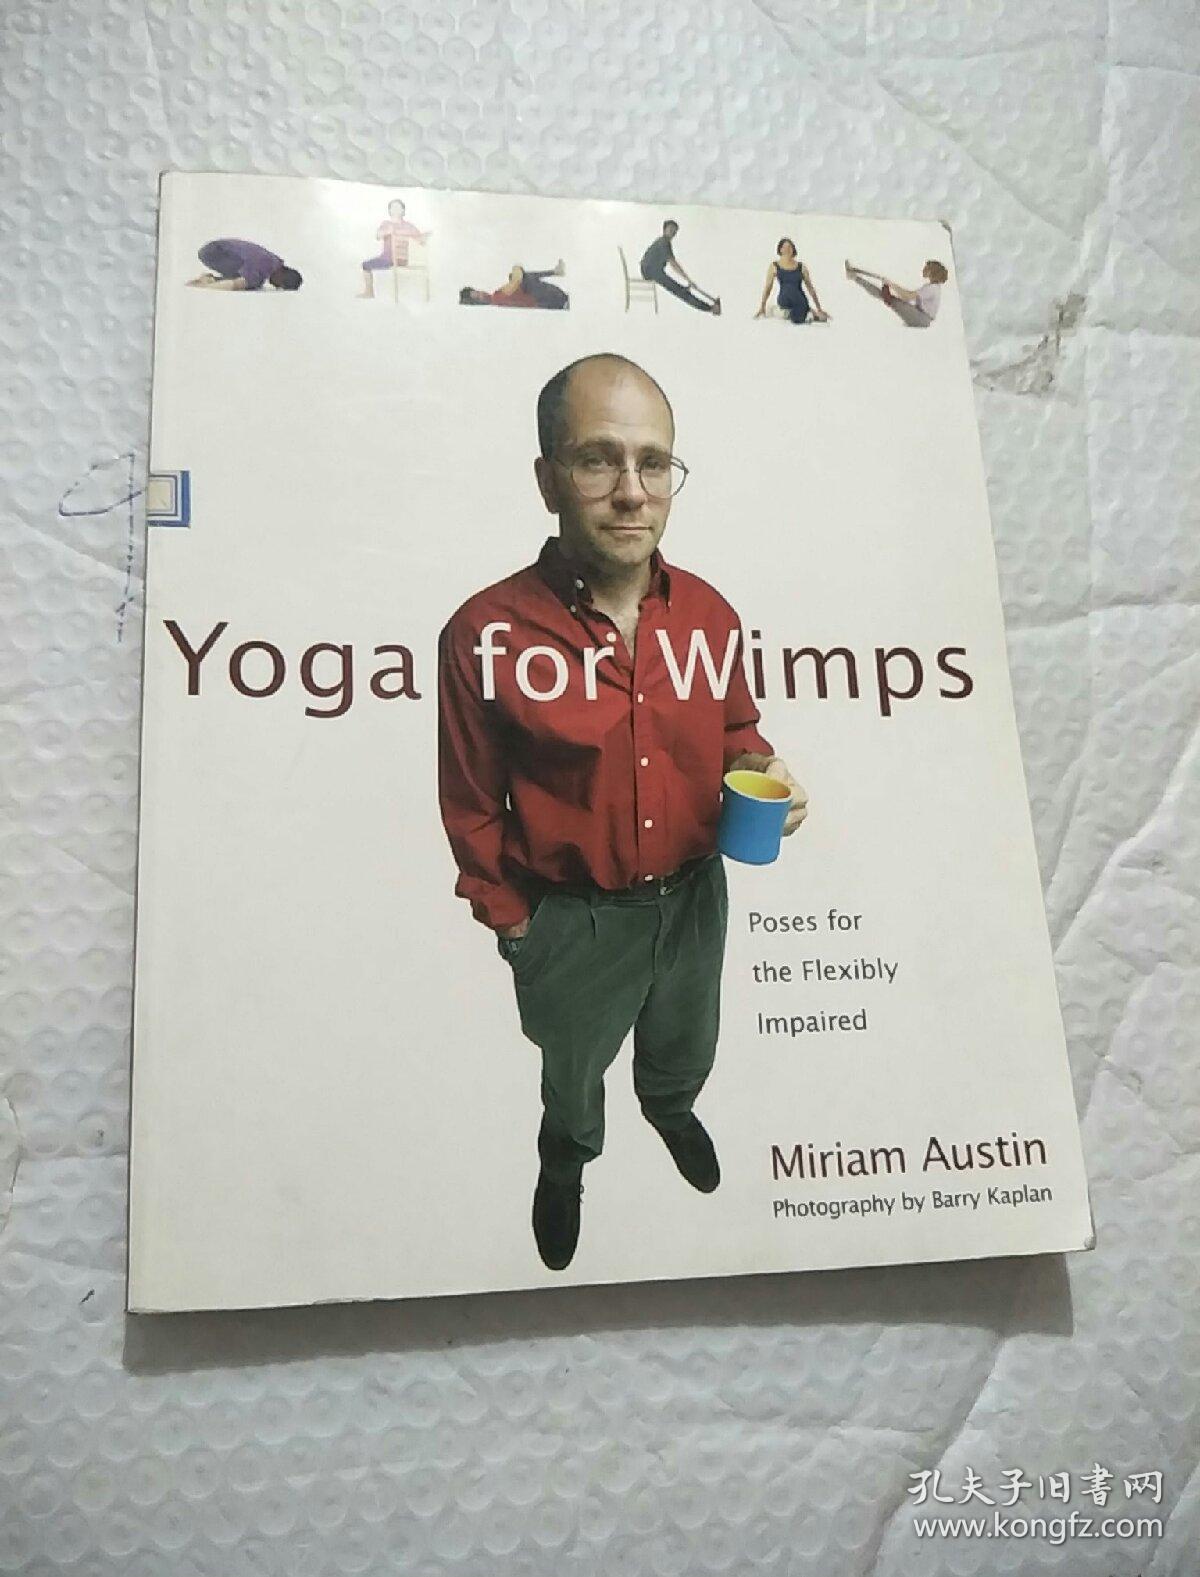 Yoga for Wimps: Poses for the Flexibly Impaired （详情看图）